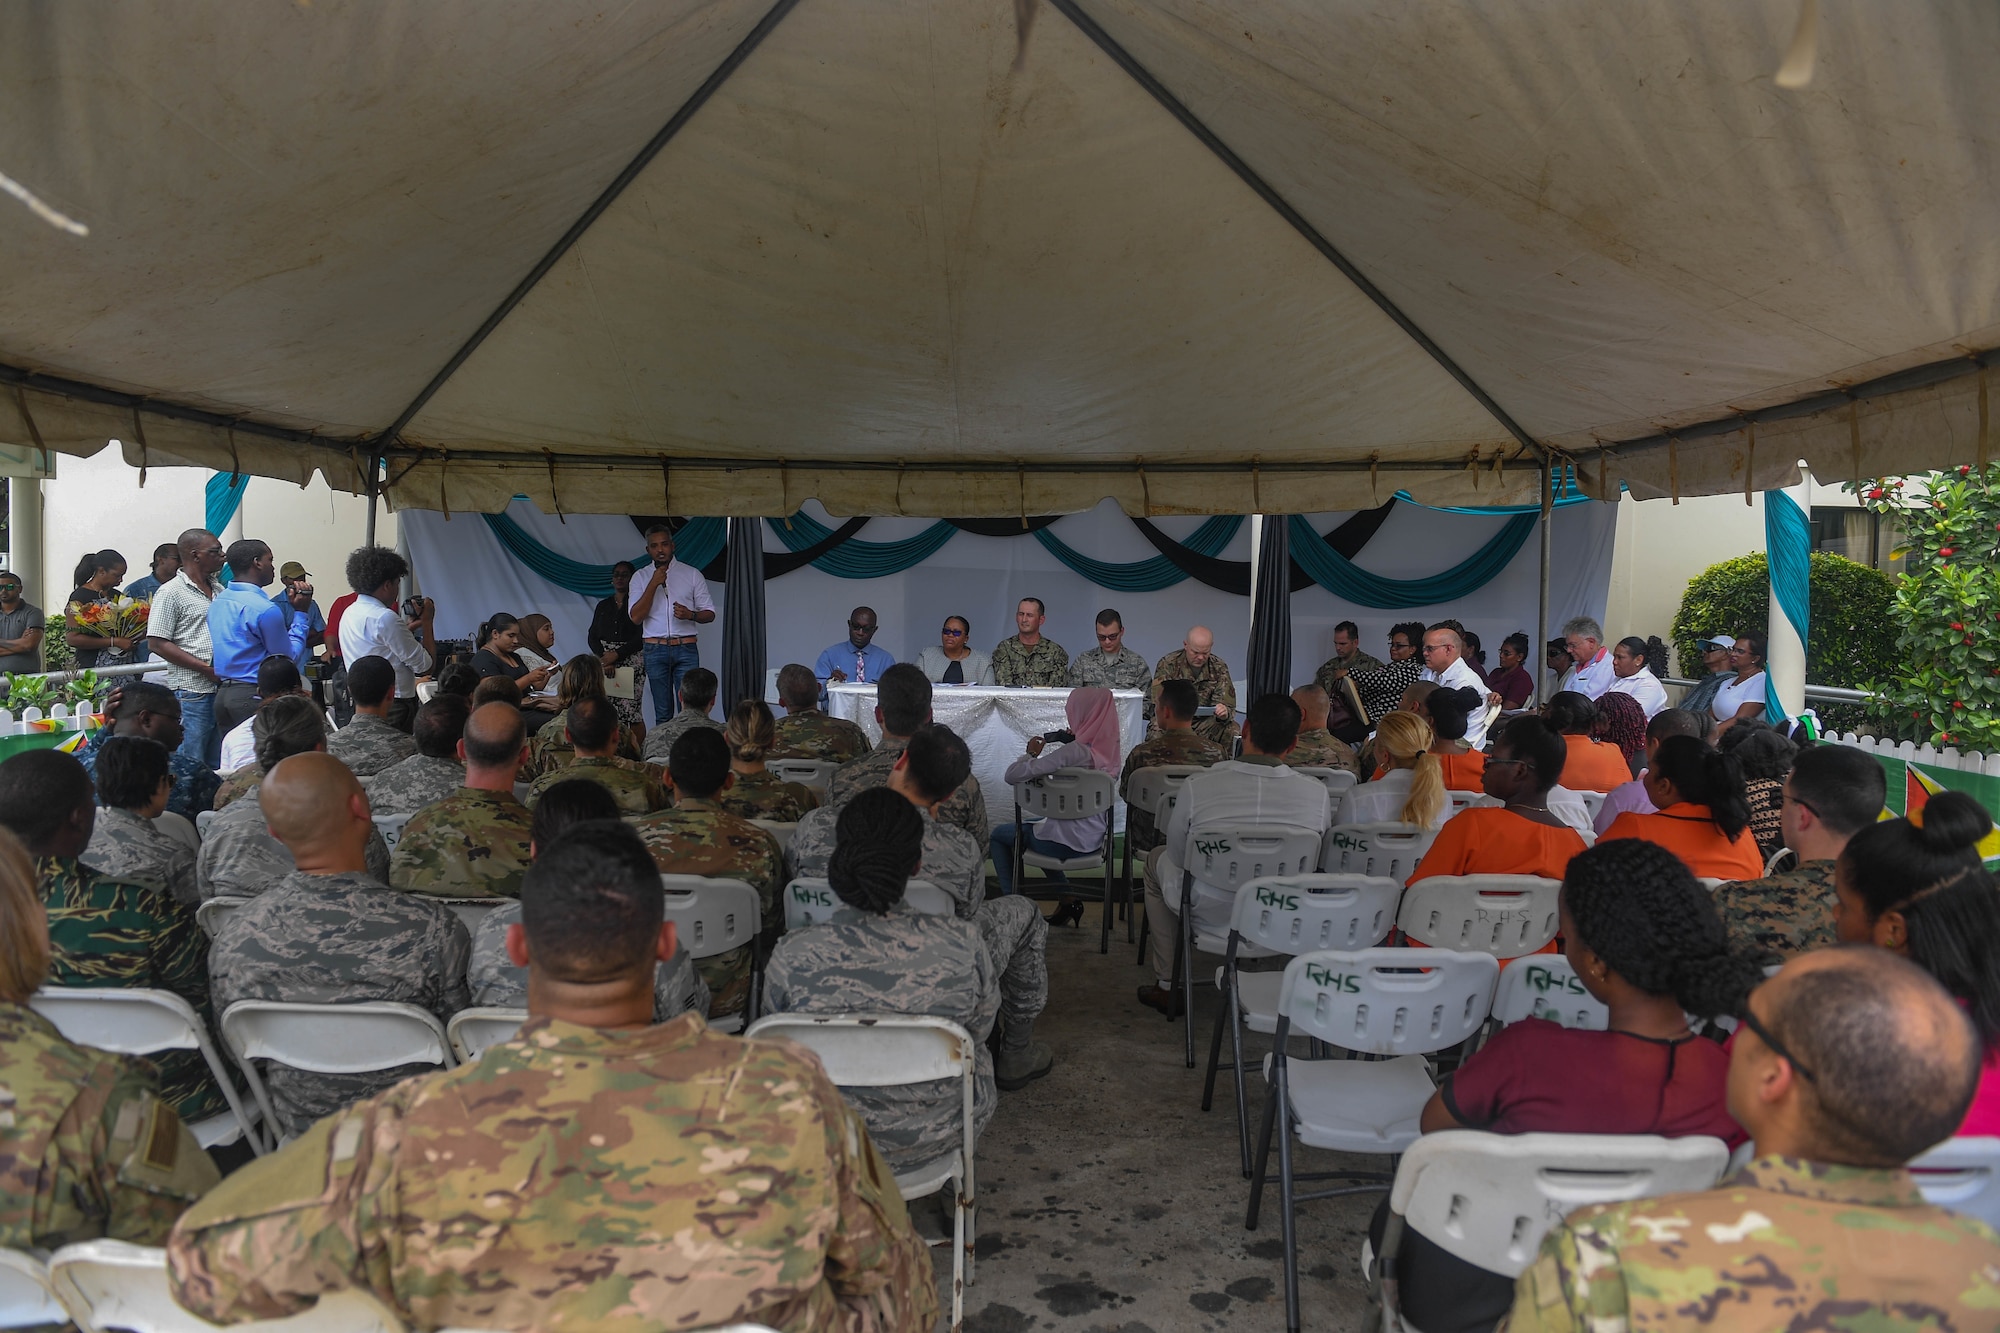 Dr. Devendra Radhy, Port Mourant doctor in charge, speaks during the closing ceremony of the ophthalmology center during New Horizons exercise 2019 at Port Mourant, Guyana, May 16, 2019. The ophthalmology clinic was established to provide aid to the Guyanese population by screening and selecting patients to receive cataract surgery in support of New Horizons 2019. The New Horizons exercise 2019 provides U.S. military members an opportunity to train for an overseas deployment and the logistical requirements it entails. The exercise promotes bilateral cooperation by providing opportunities for U.S. and partner nation military engineers, medical personnel and support staff to work and train side by side.(U.S. Air Force photo by Senior Airman Derek Seifert)